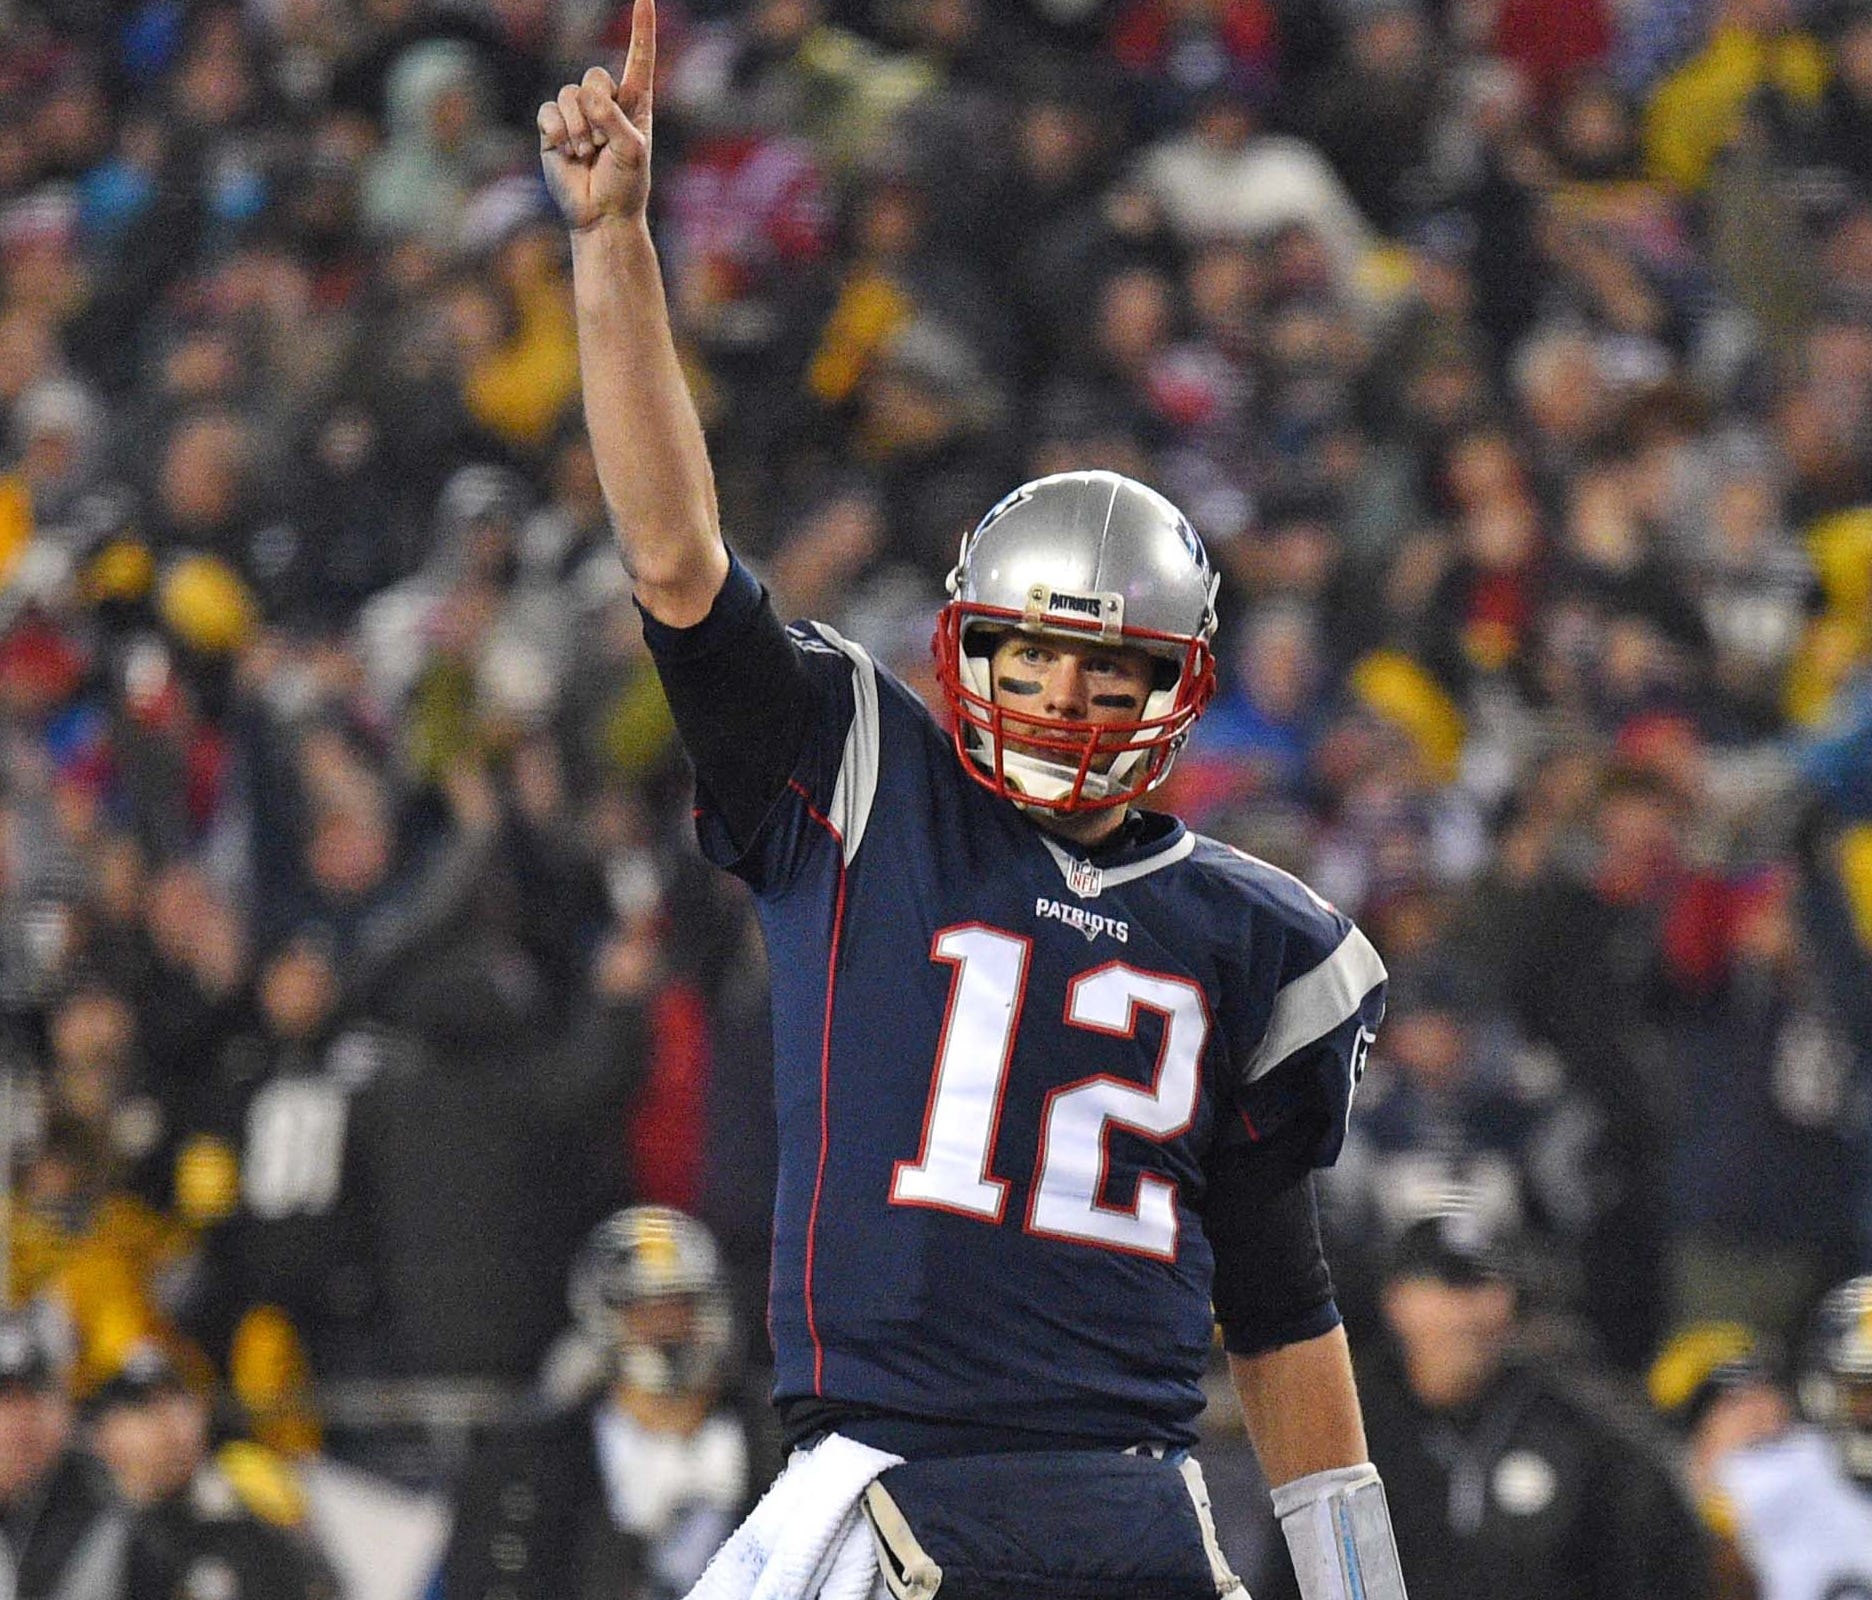 Patriots QB Tom Brady was also voted atop the NFL Network Top 100 list in 2011.